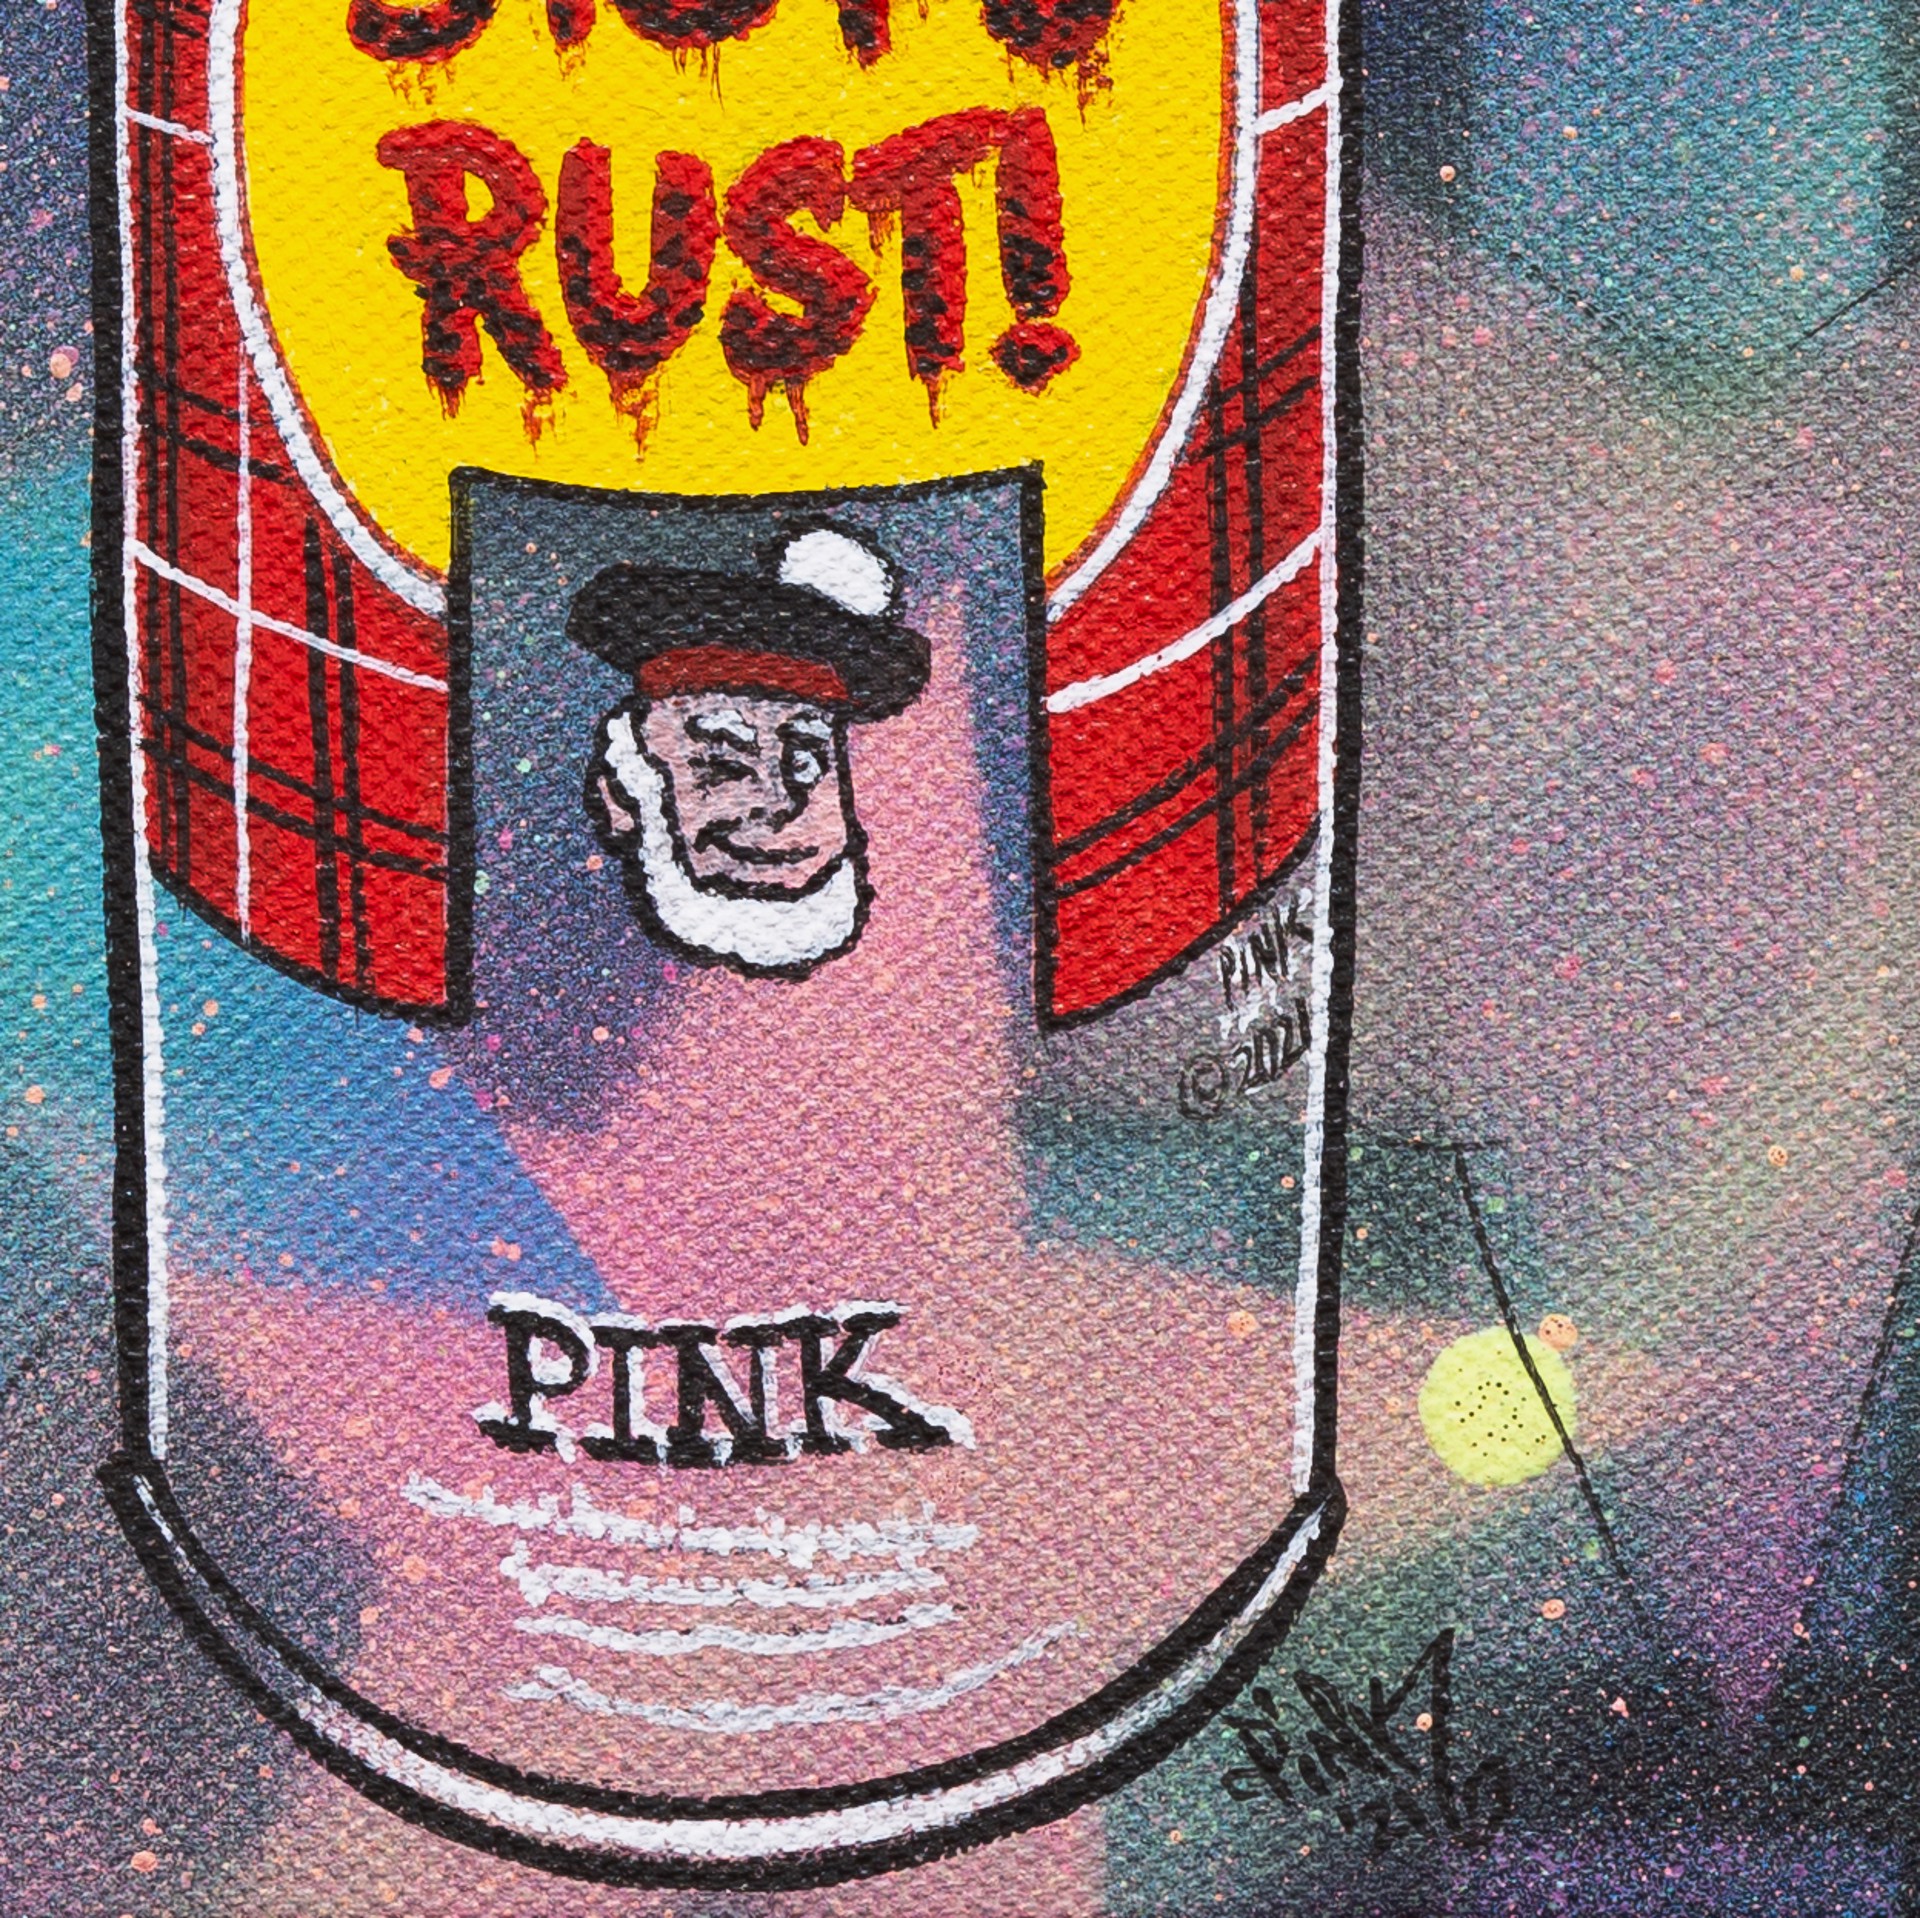 Rusto PINK by Lady Pink